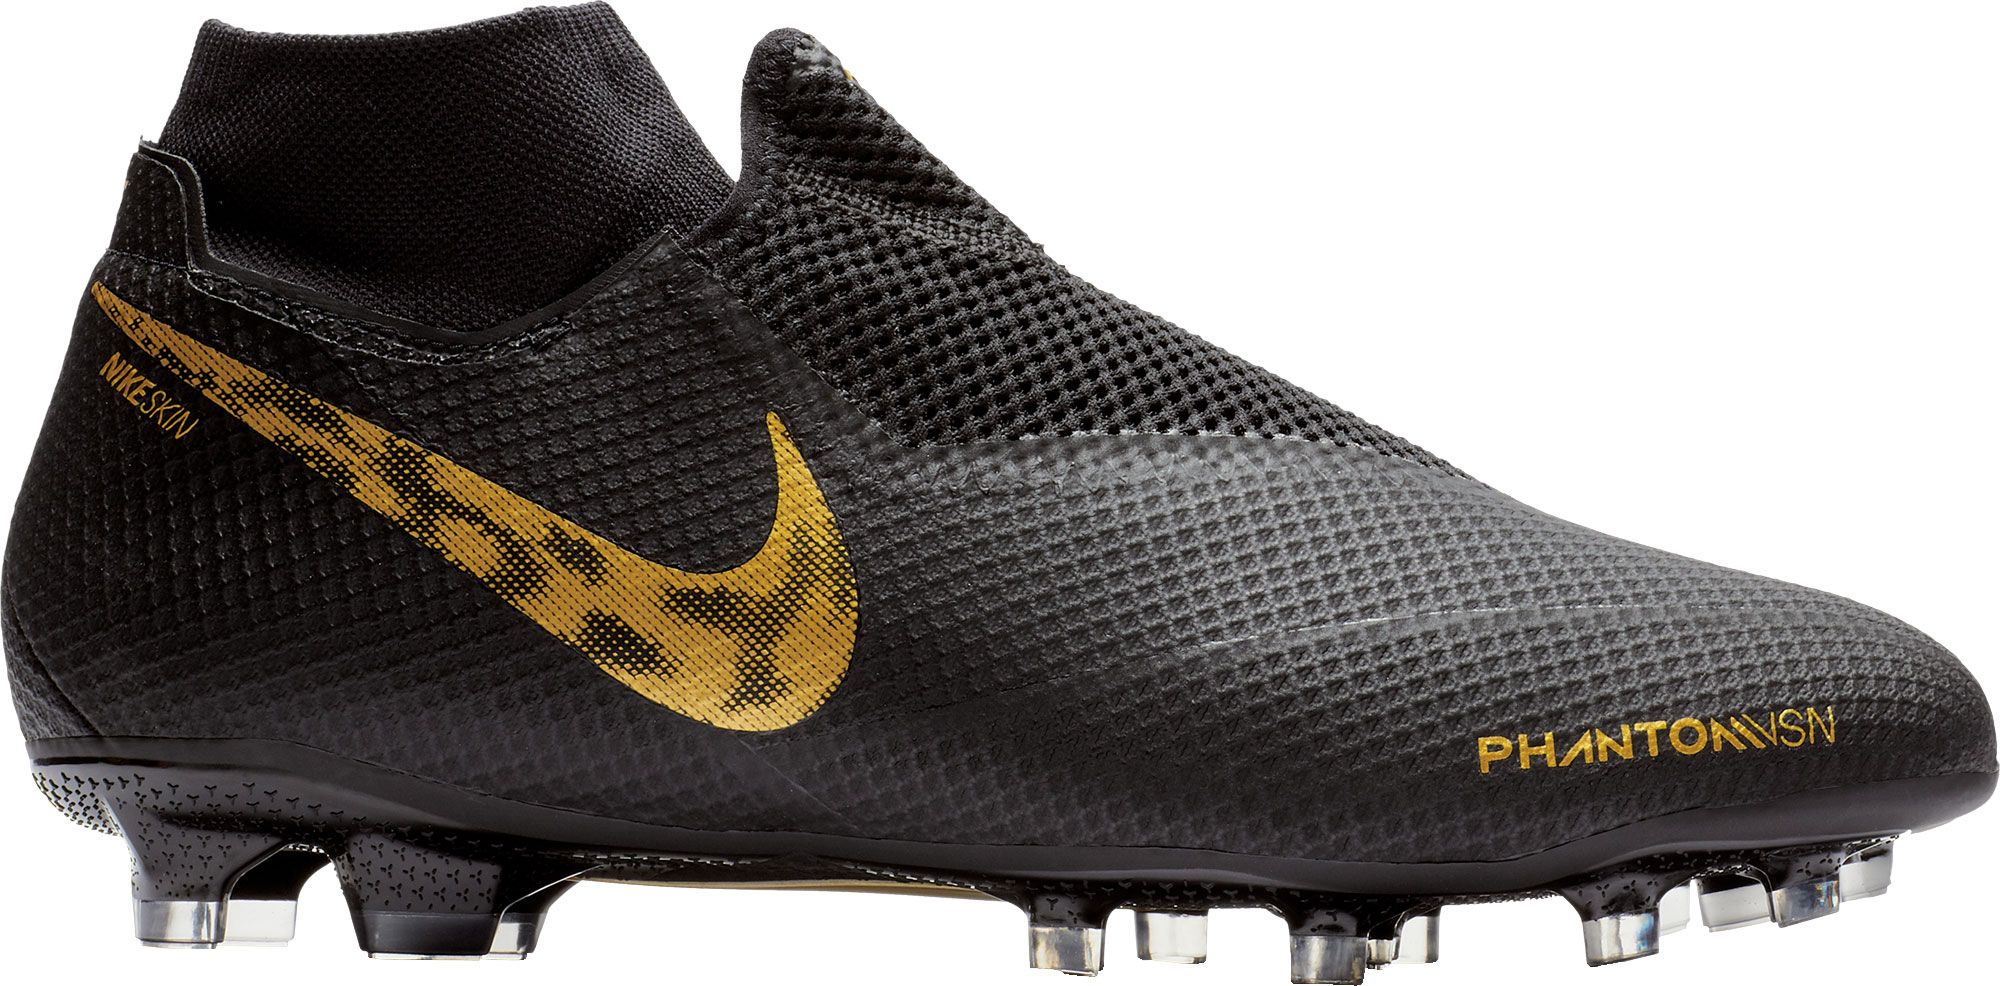 new nike football boots black and gold